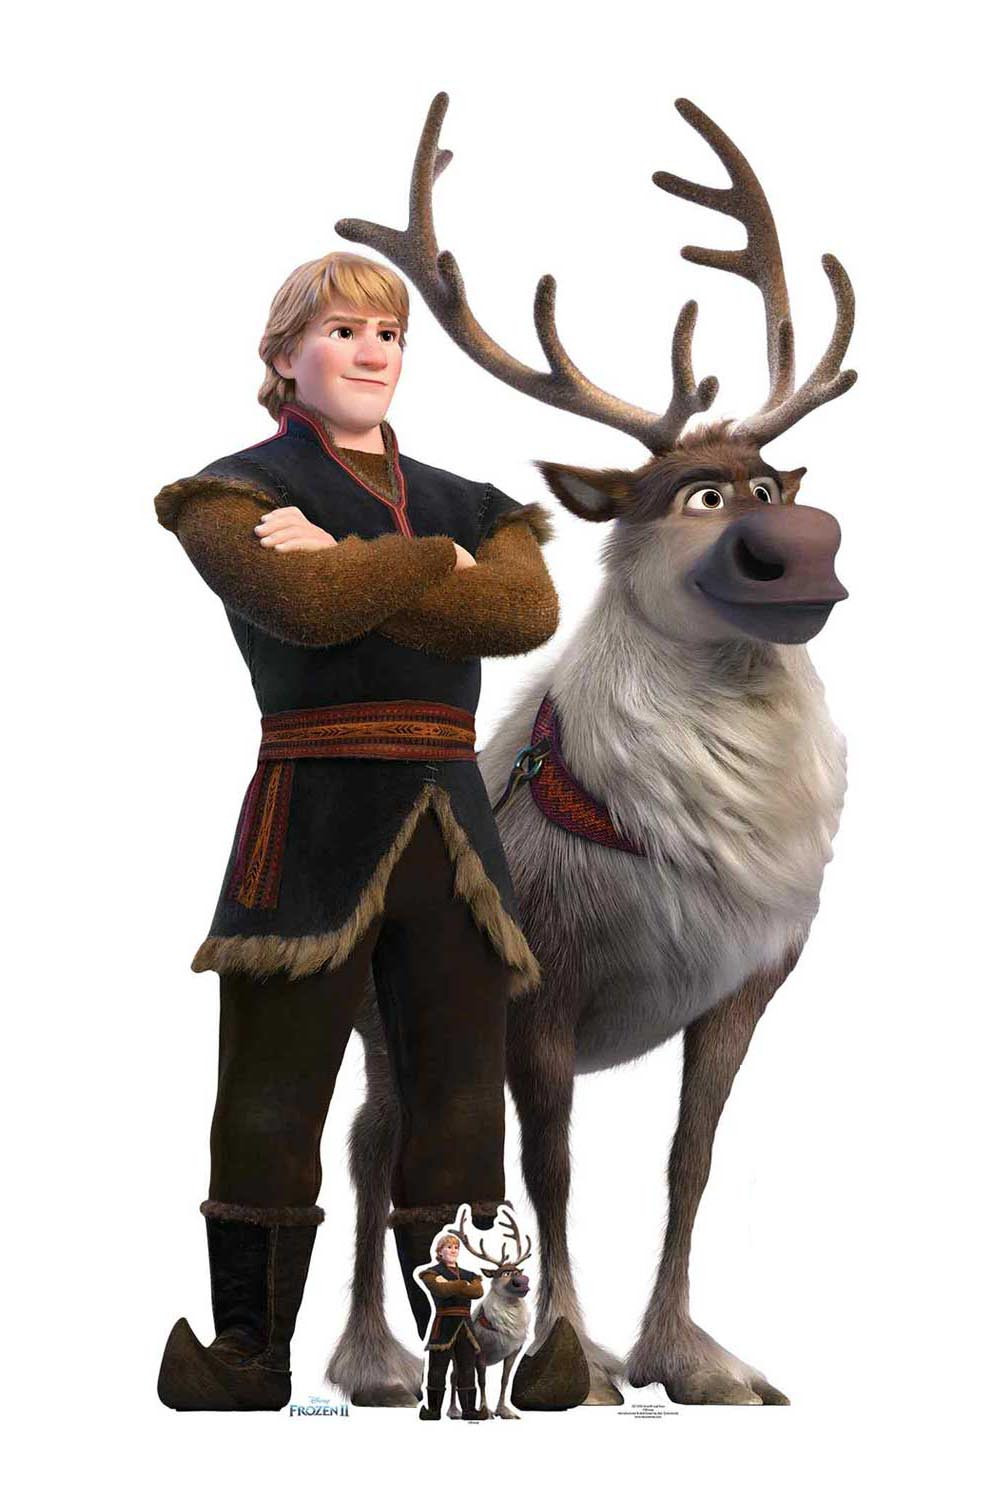 https://cdn11.bigcommerce.com/s-ydriczk/images/stencil/1500x1500/products/89065/93626/Frozen-2-Kristoff-and-Sven-official-cardboard-cutout-buy-now-at-starstills__31275.1582849799.jpg?c=2